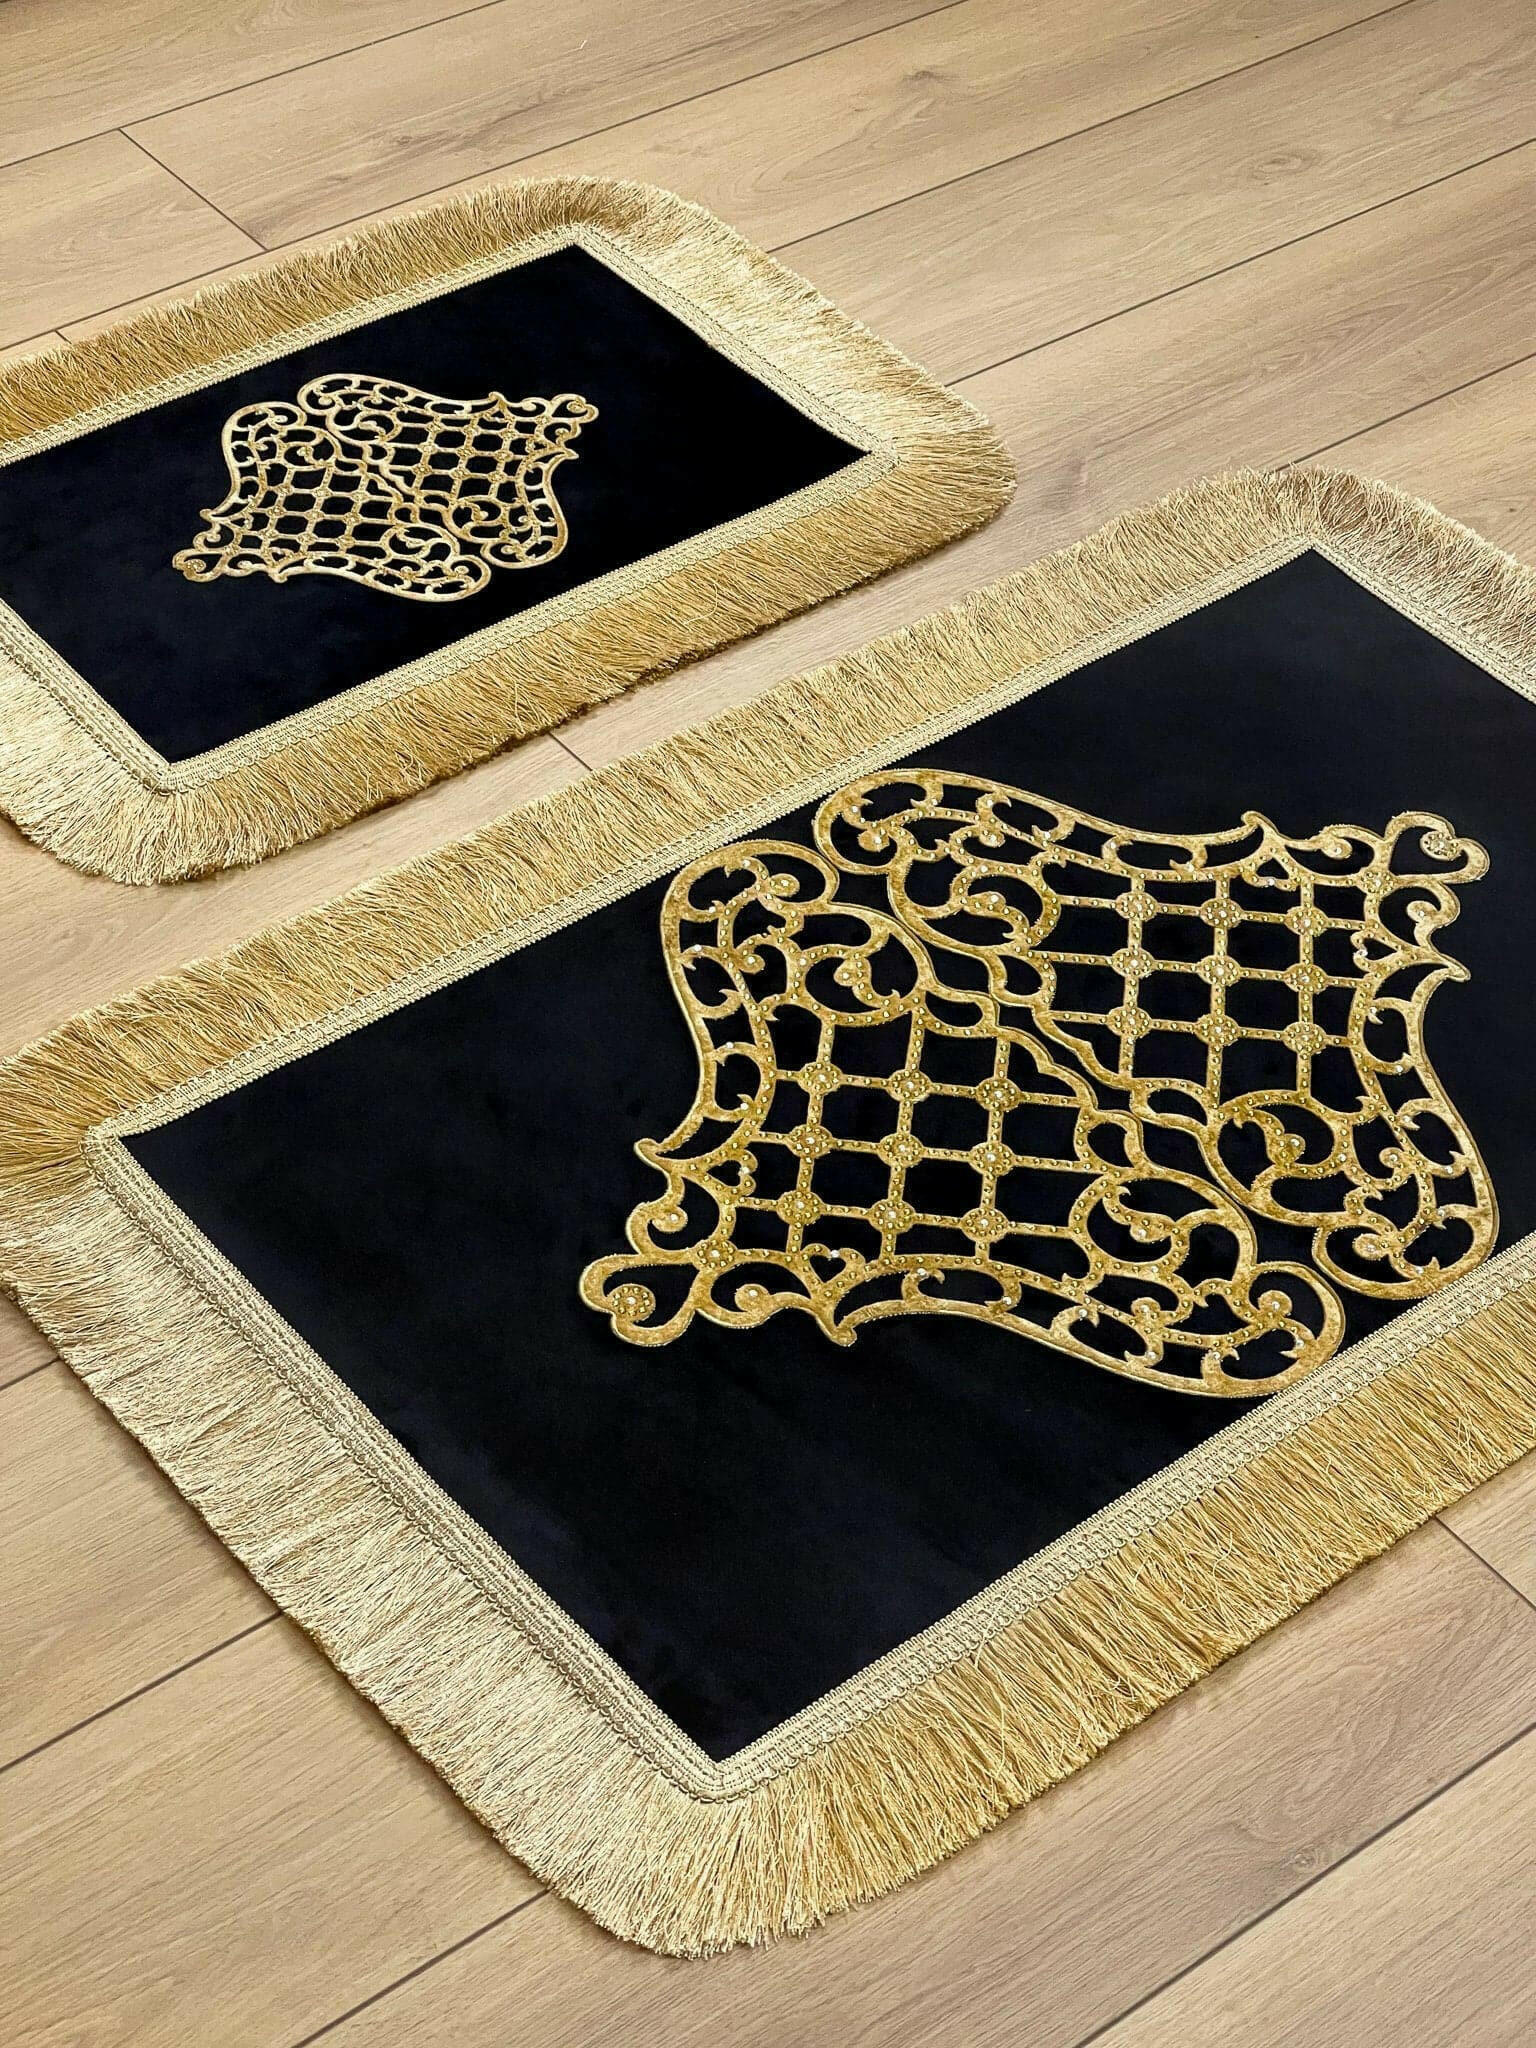 Mihrace Rug Oriental Chic Black & Gold Color Rug - Creative Home Designs Rugs, Oriental Style Turkish Carpet, Rectangular Mat With Diamonds & Tassels,RUG-MHRC-BlaGo-4060,RUG-MHRC-BlaGo-60100,RUG-MHRC-BlaGo-70120,RUG-MHRC-BlaGo-90150,RUG-MHRC-BlaGo-121182,RUG-MHRC-BlaGo-152243